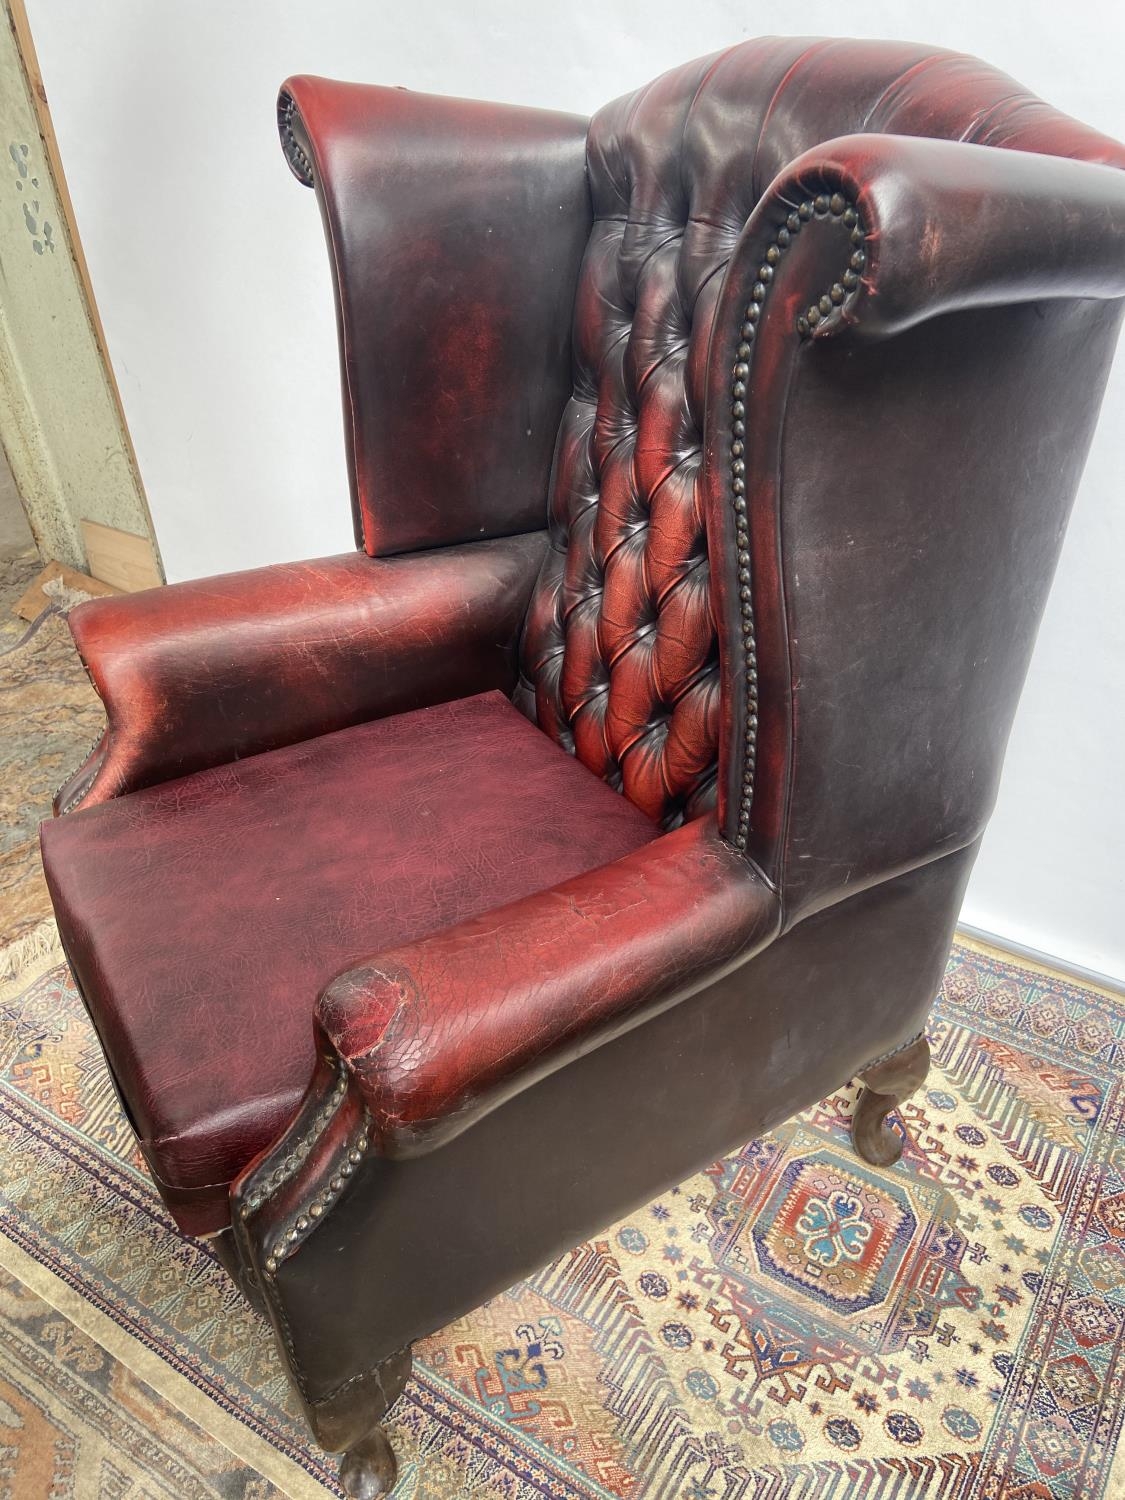 Antique chesterfield oxblood red gull wing arm chair. [107cm in height] - Image 5 of 7